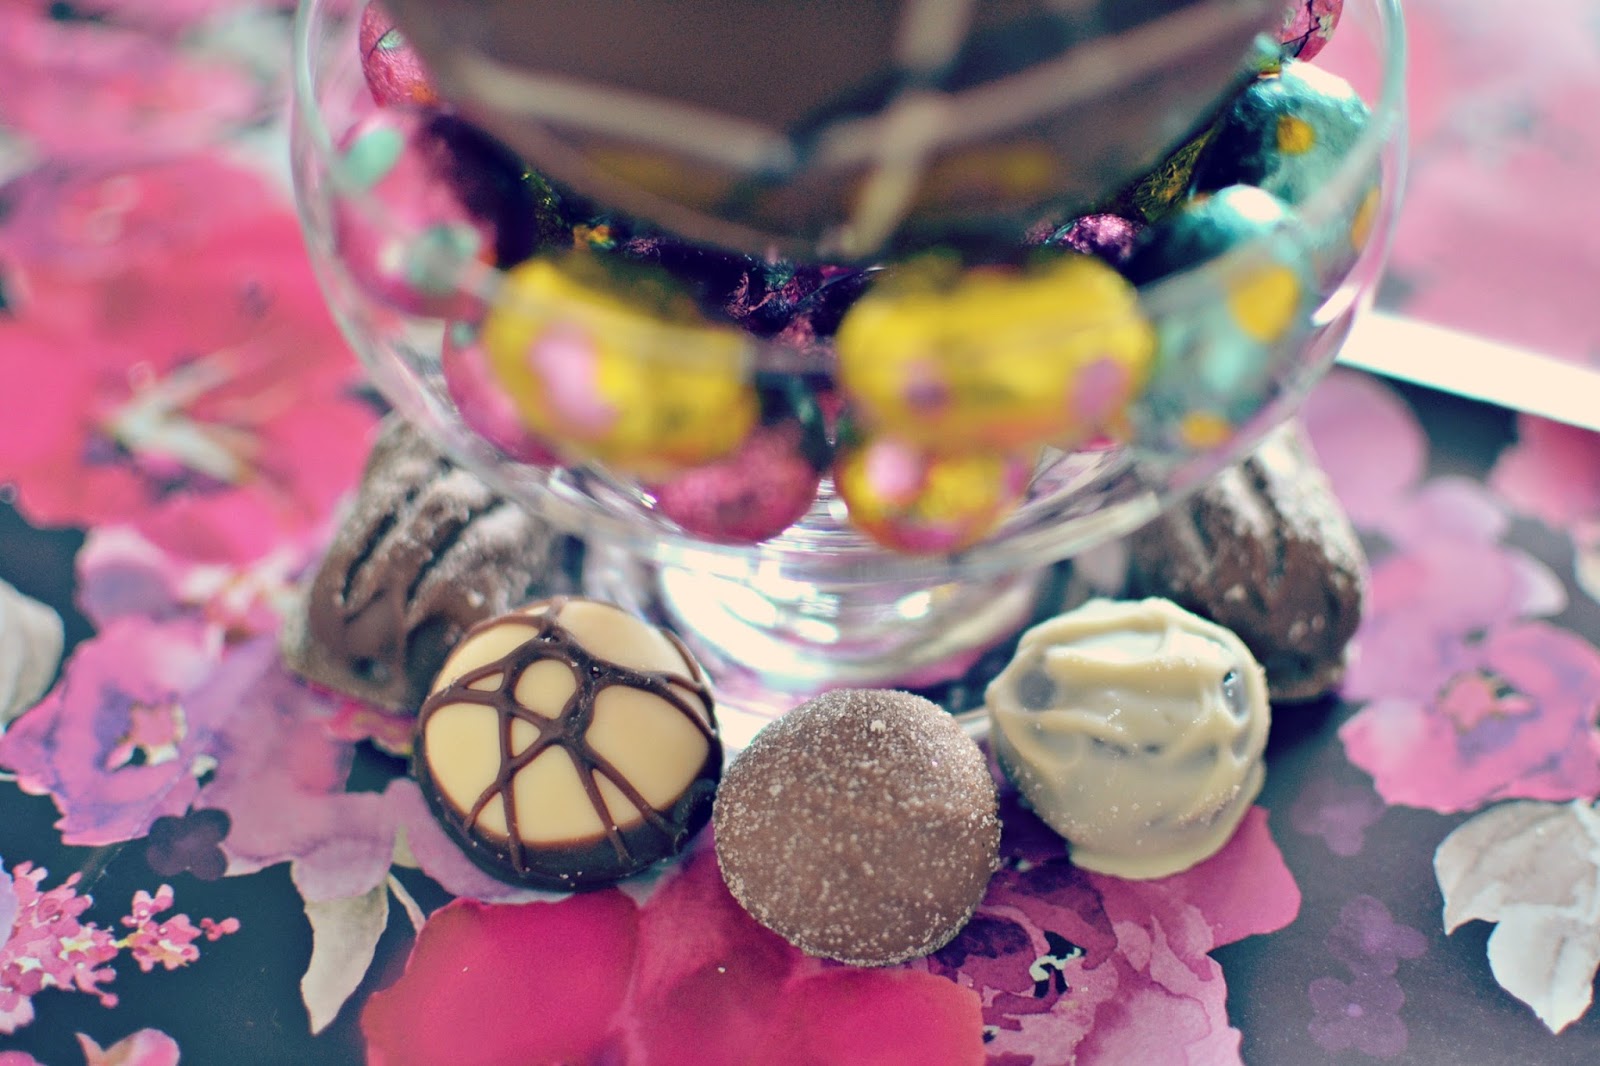 Thorntons Continental chocolate egg and truffles